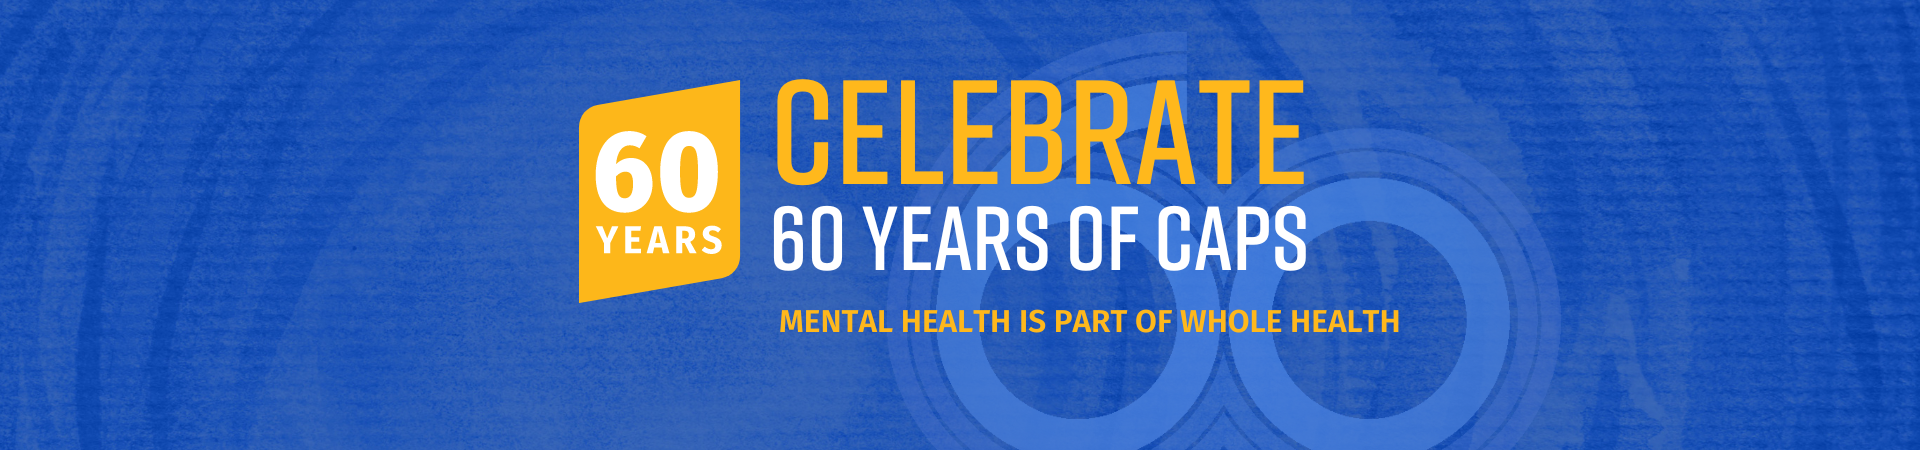 Blue banner with yellow "60 Years" flag. "Celebrate 60 Year of CAPS"with slogan "Mental health is part of whole health" text written in yellow and white fonts.